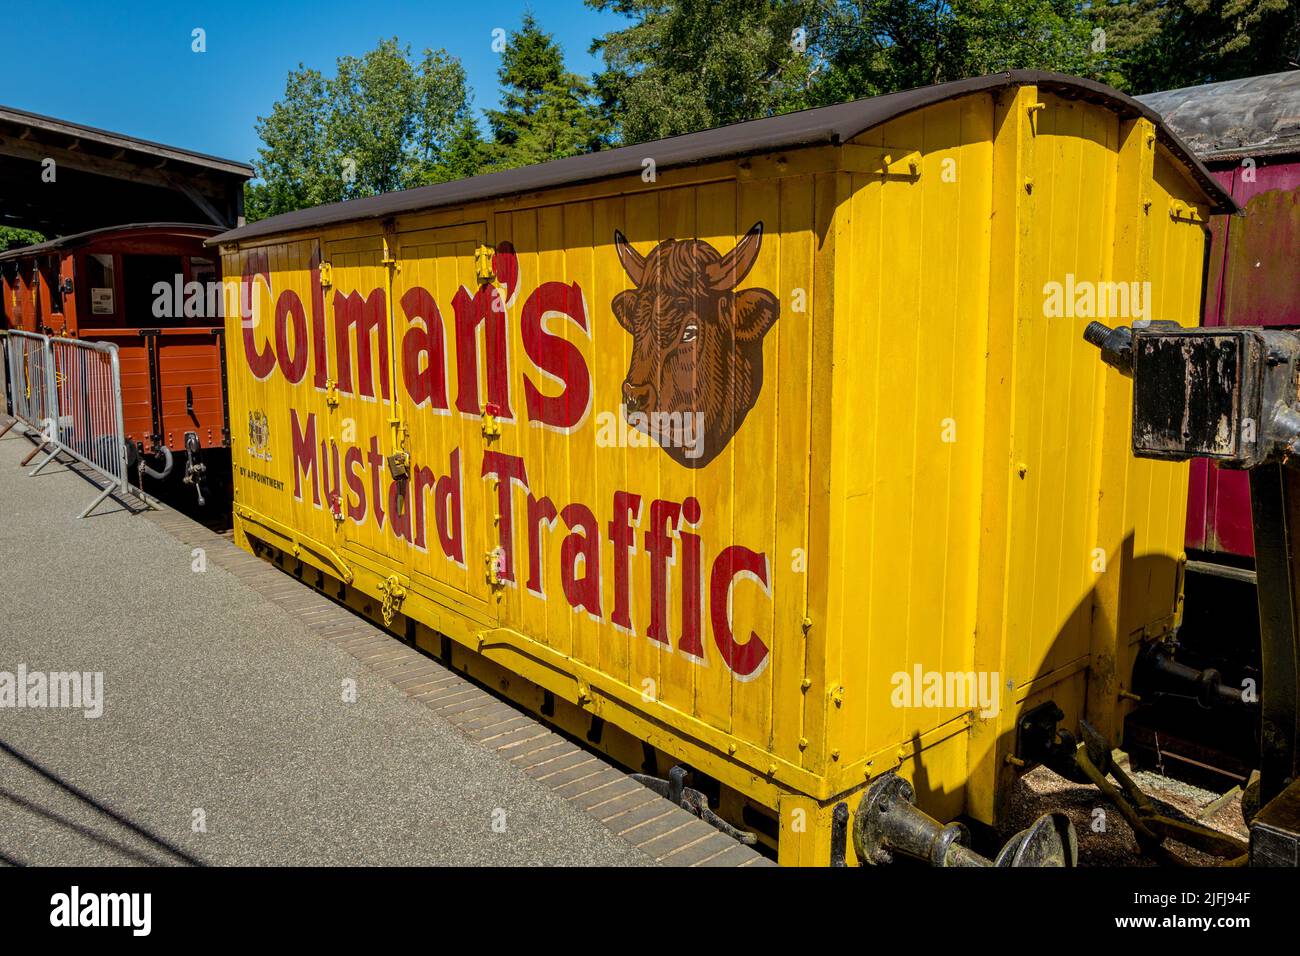 Colman’s mustard van in its distinctive yellow packaging and bull’s head logo. Stock Photo